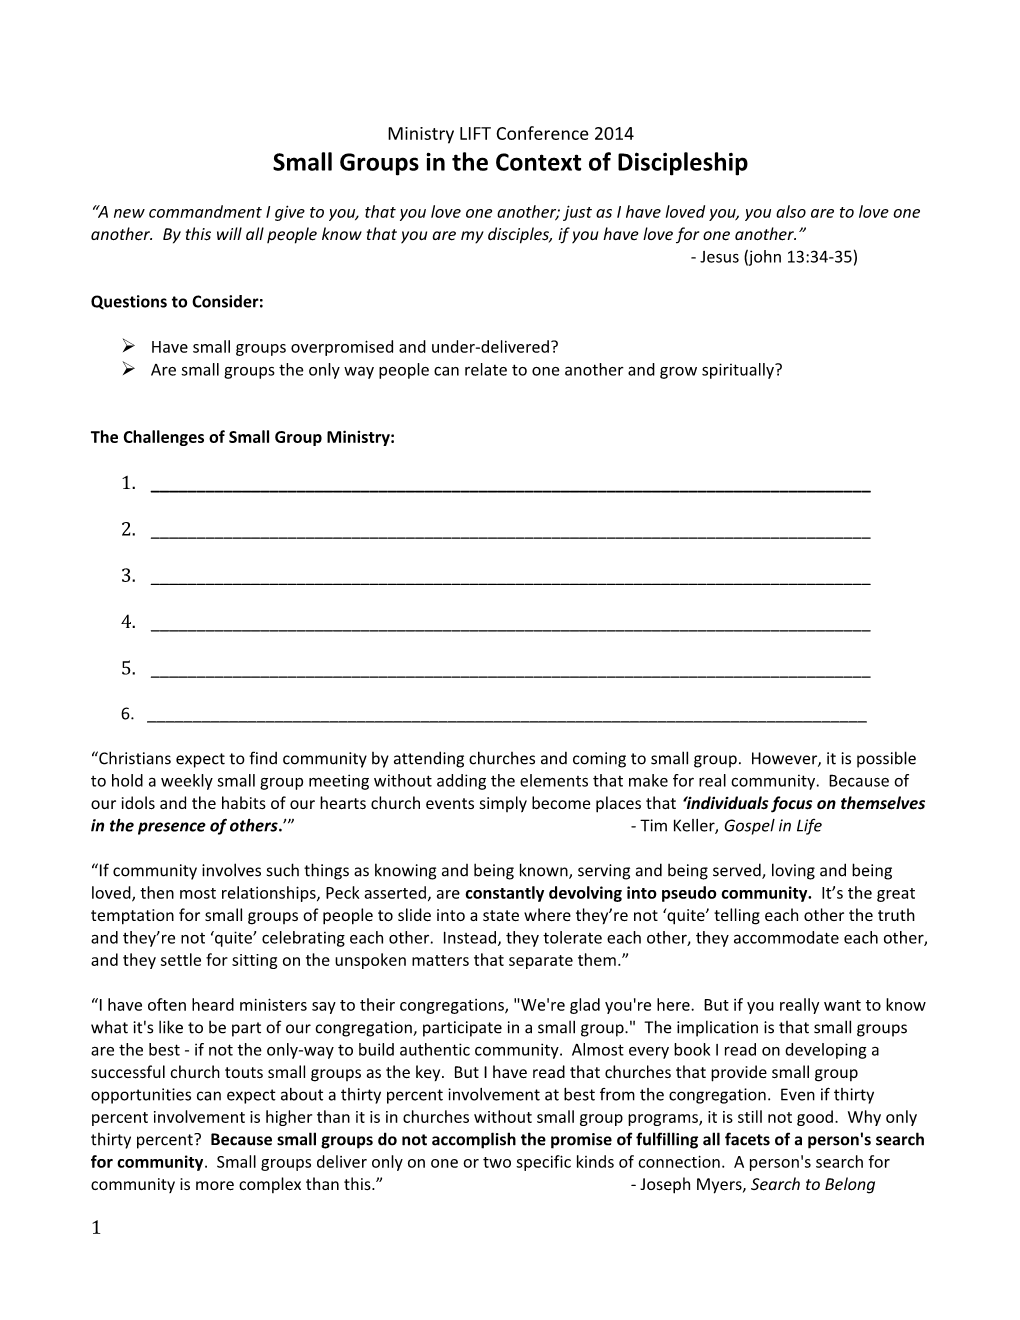 Small Groups in the Context of Discipleship